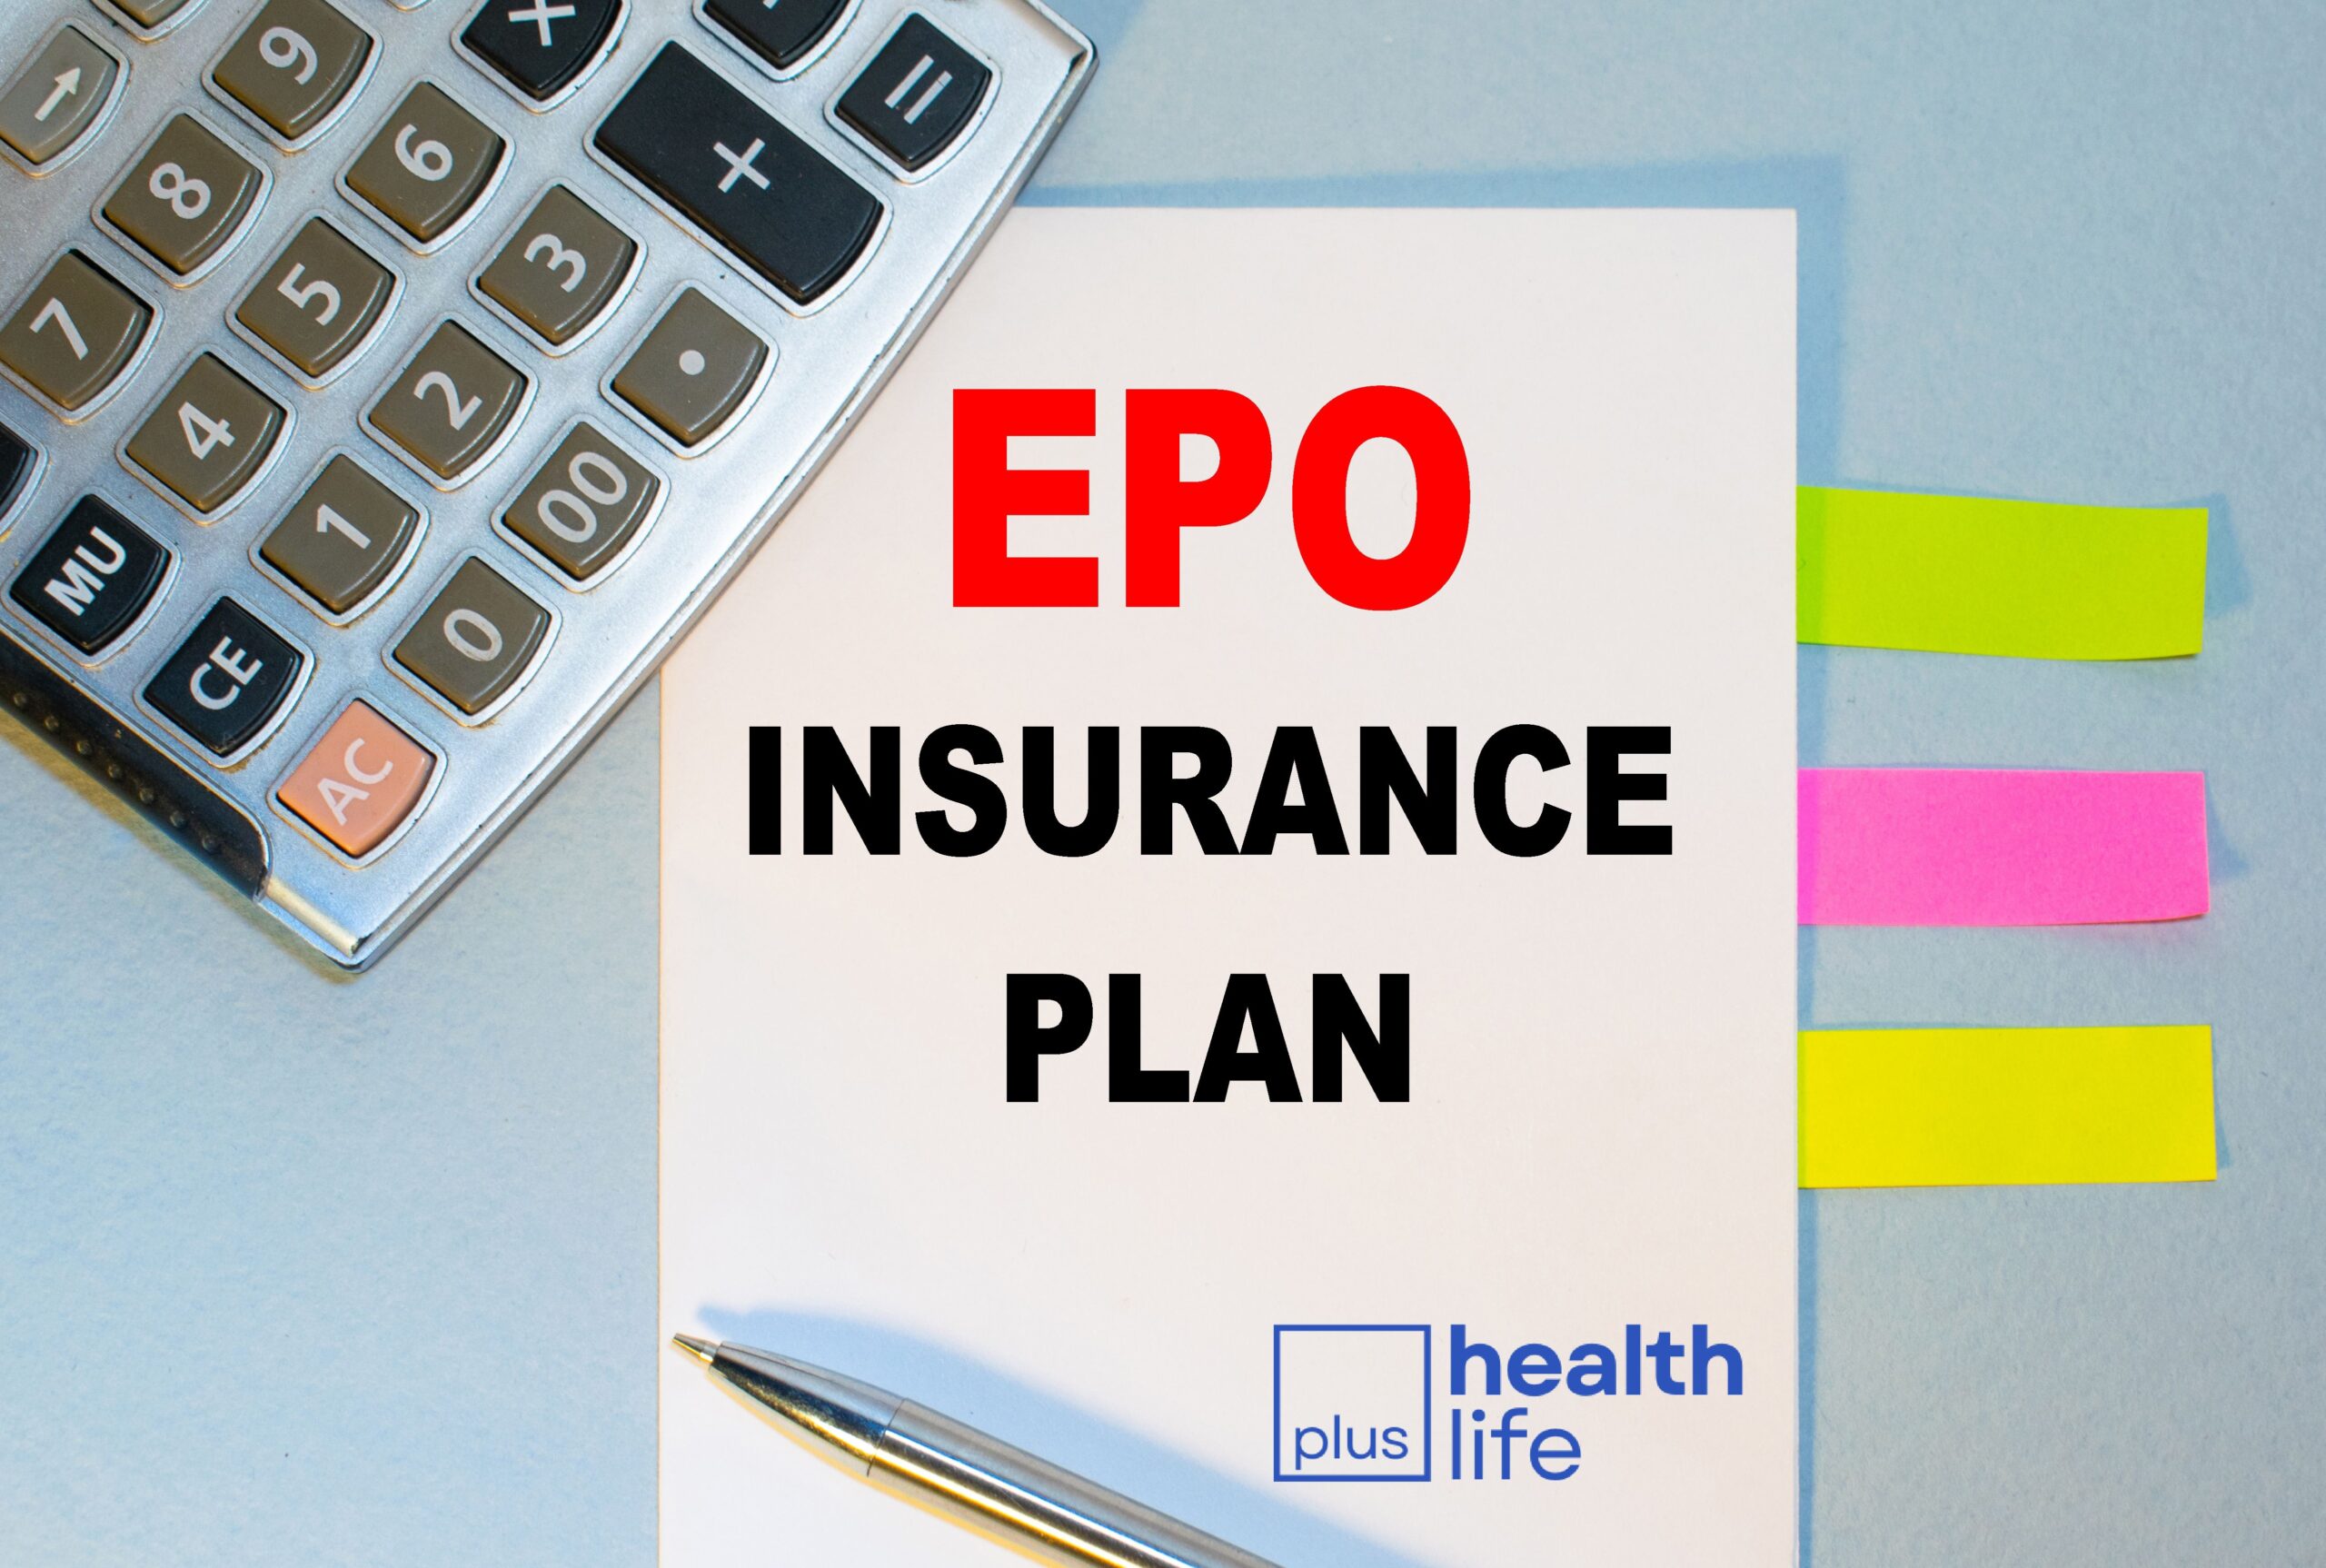 EPO health plans, affordable premiums, no PCP referral, specialist care access, cost-effective healthcare, exclusive provider network, quality healthcare services, coordinated care management, healthcare for working adults, streamlined provider selection, health insurance options, lower healthcare costs, direct specialist visits, managed care plan, employee health benefits.